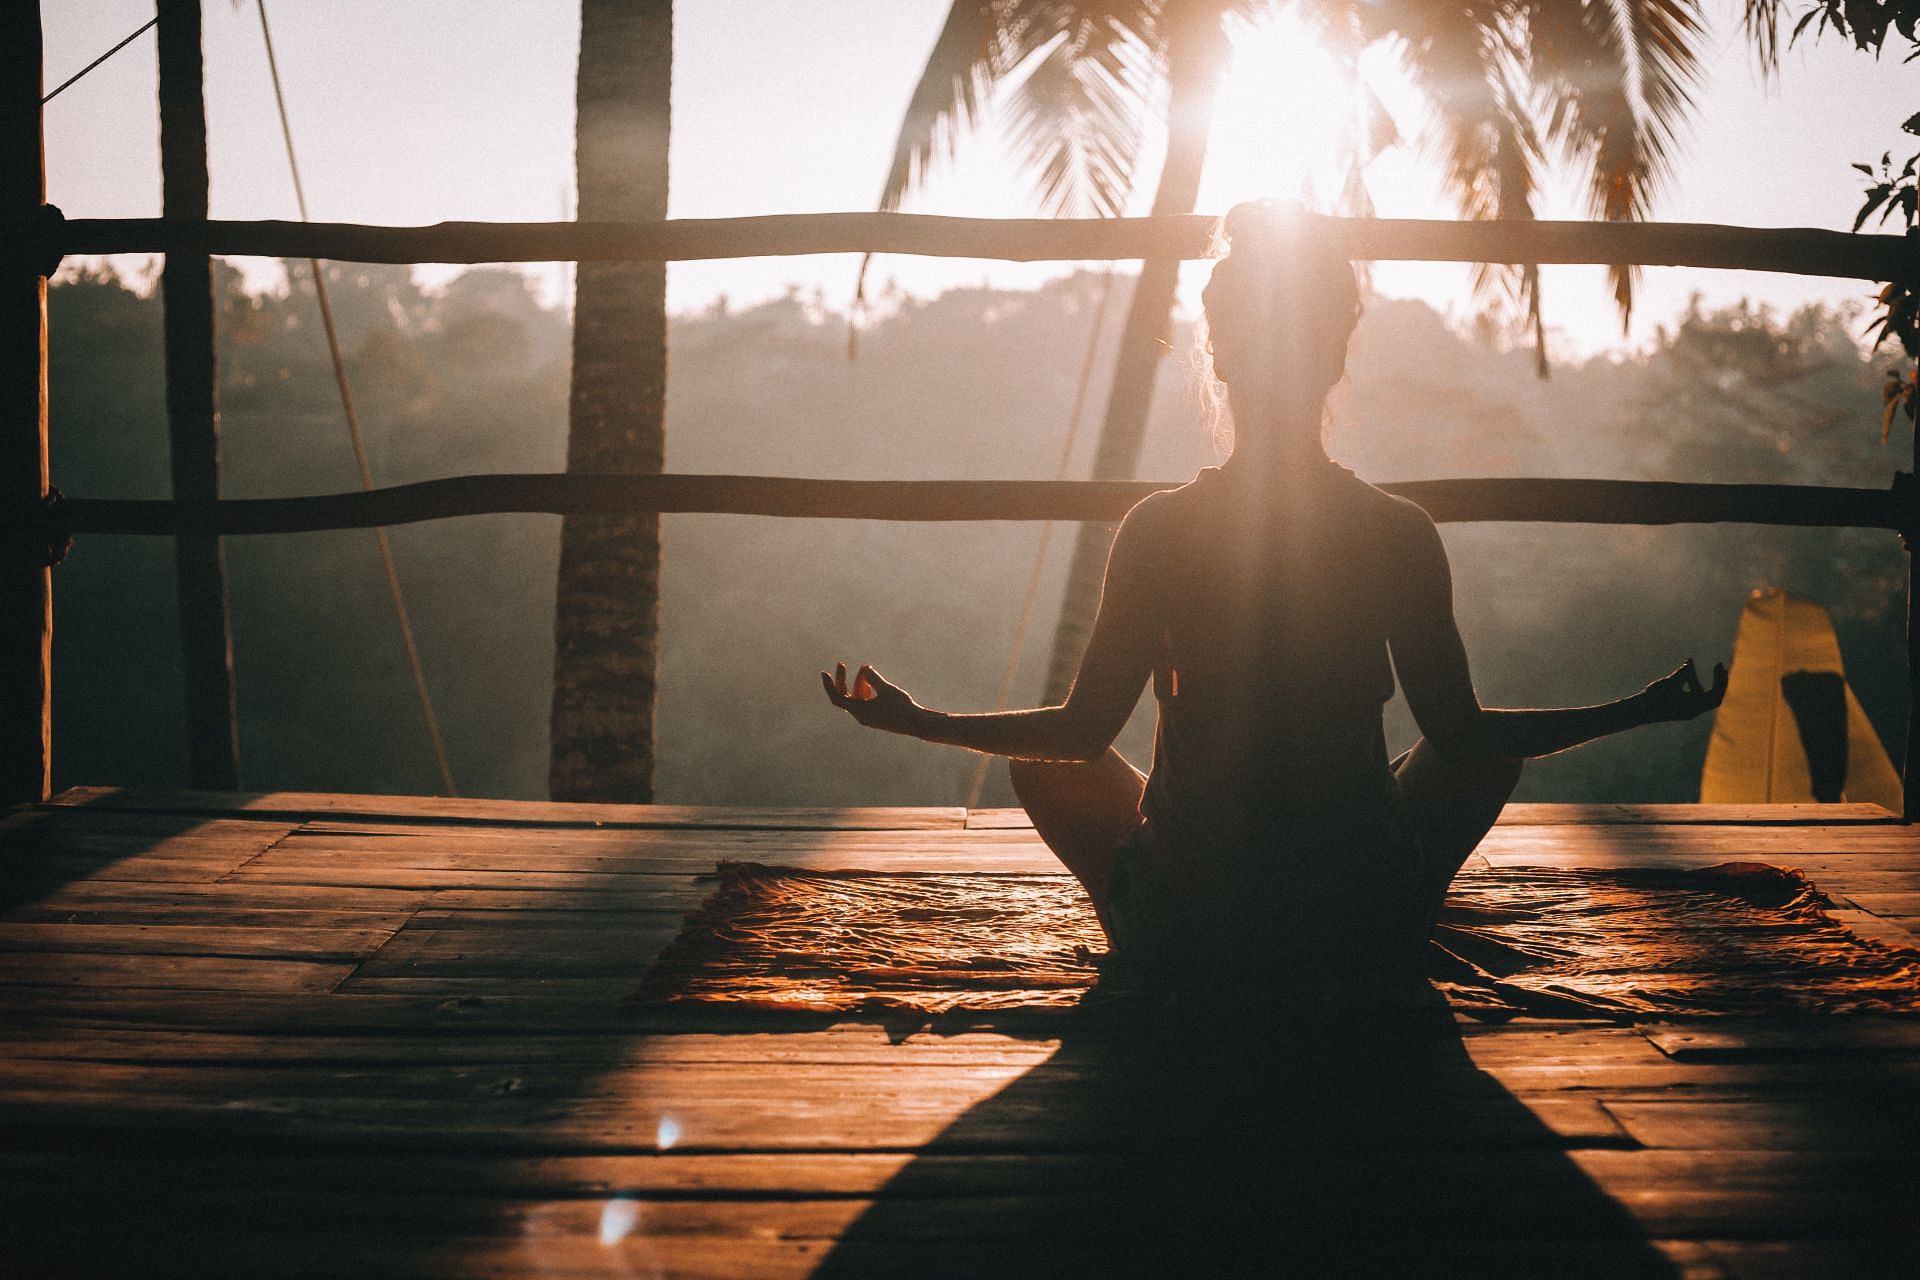 Deep breathing technique helps you to relieve stress and calm your mind. (Image via Unsplash / Jared Rice)